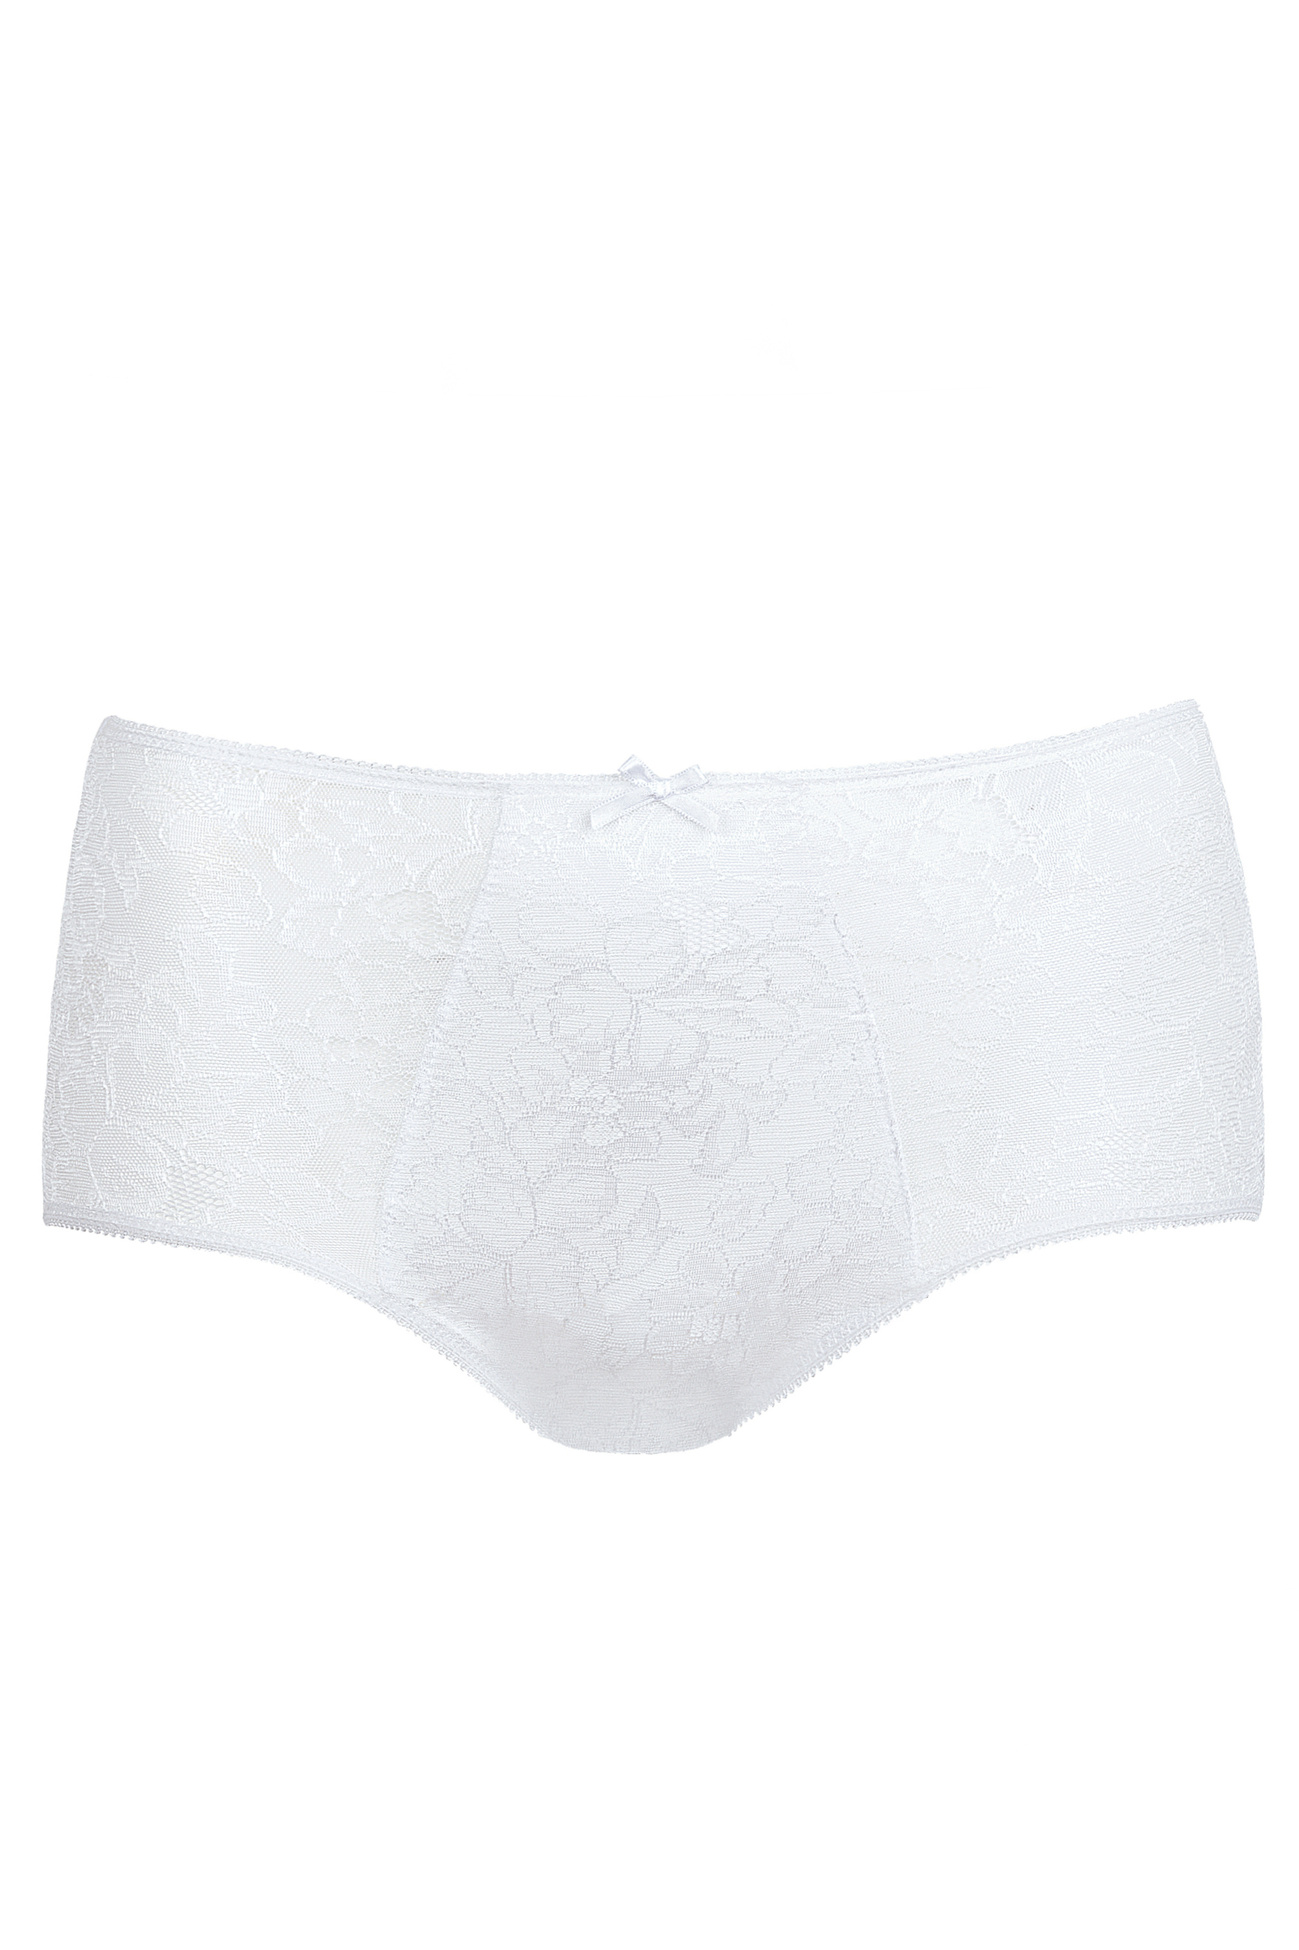 Coquette, Highwaisted Lace Panty, Style 217x, White, OS/XL